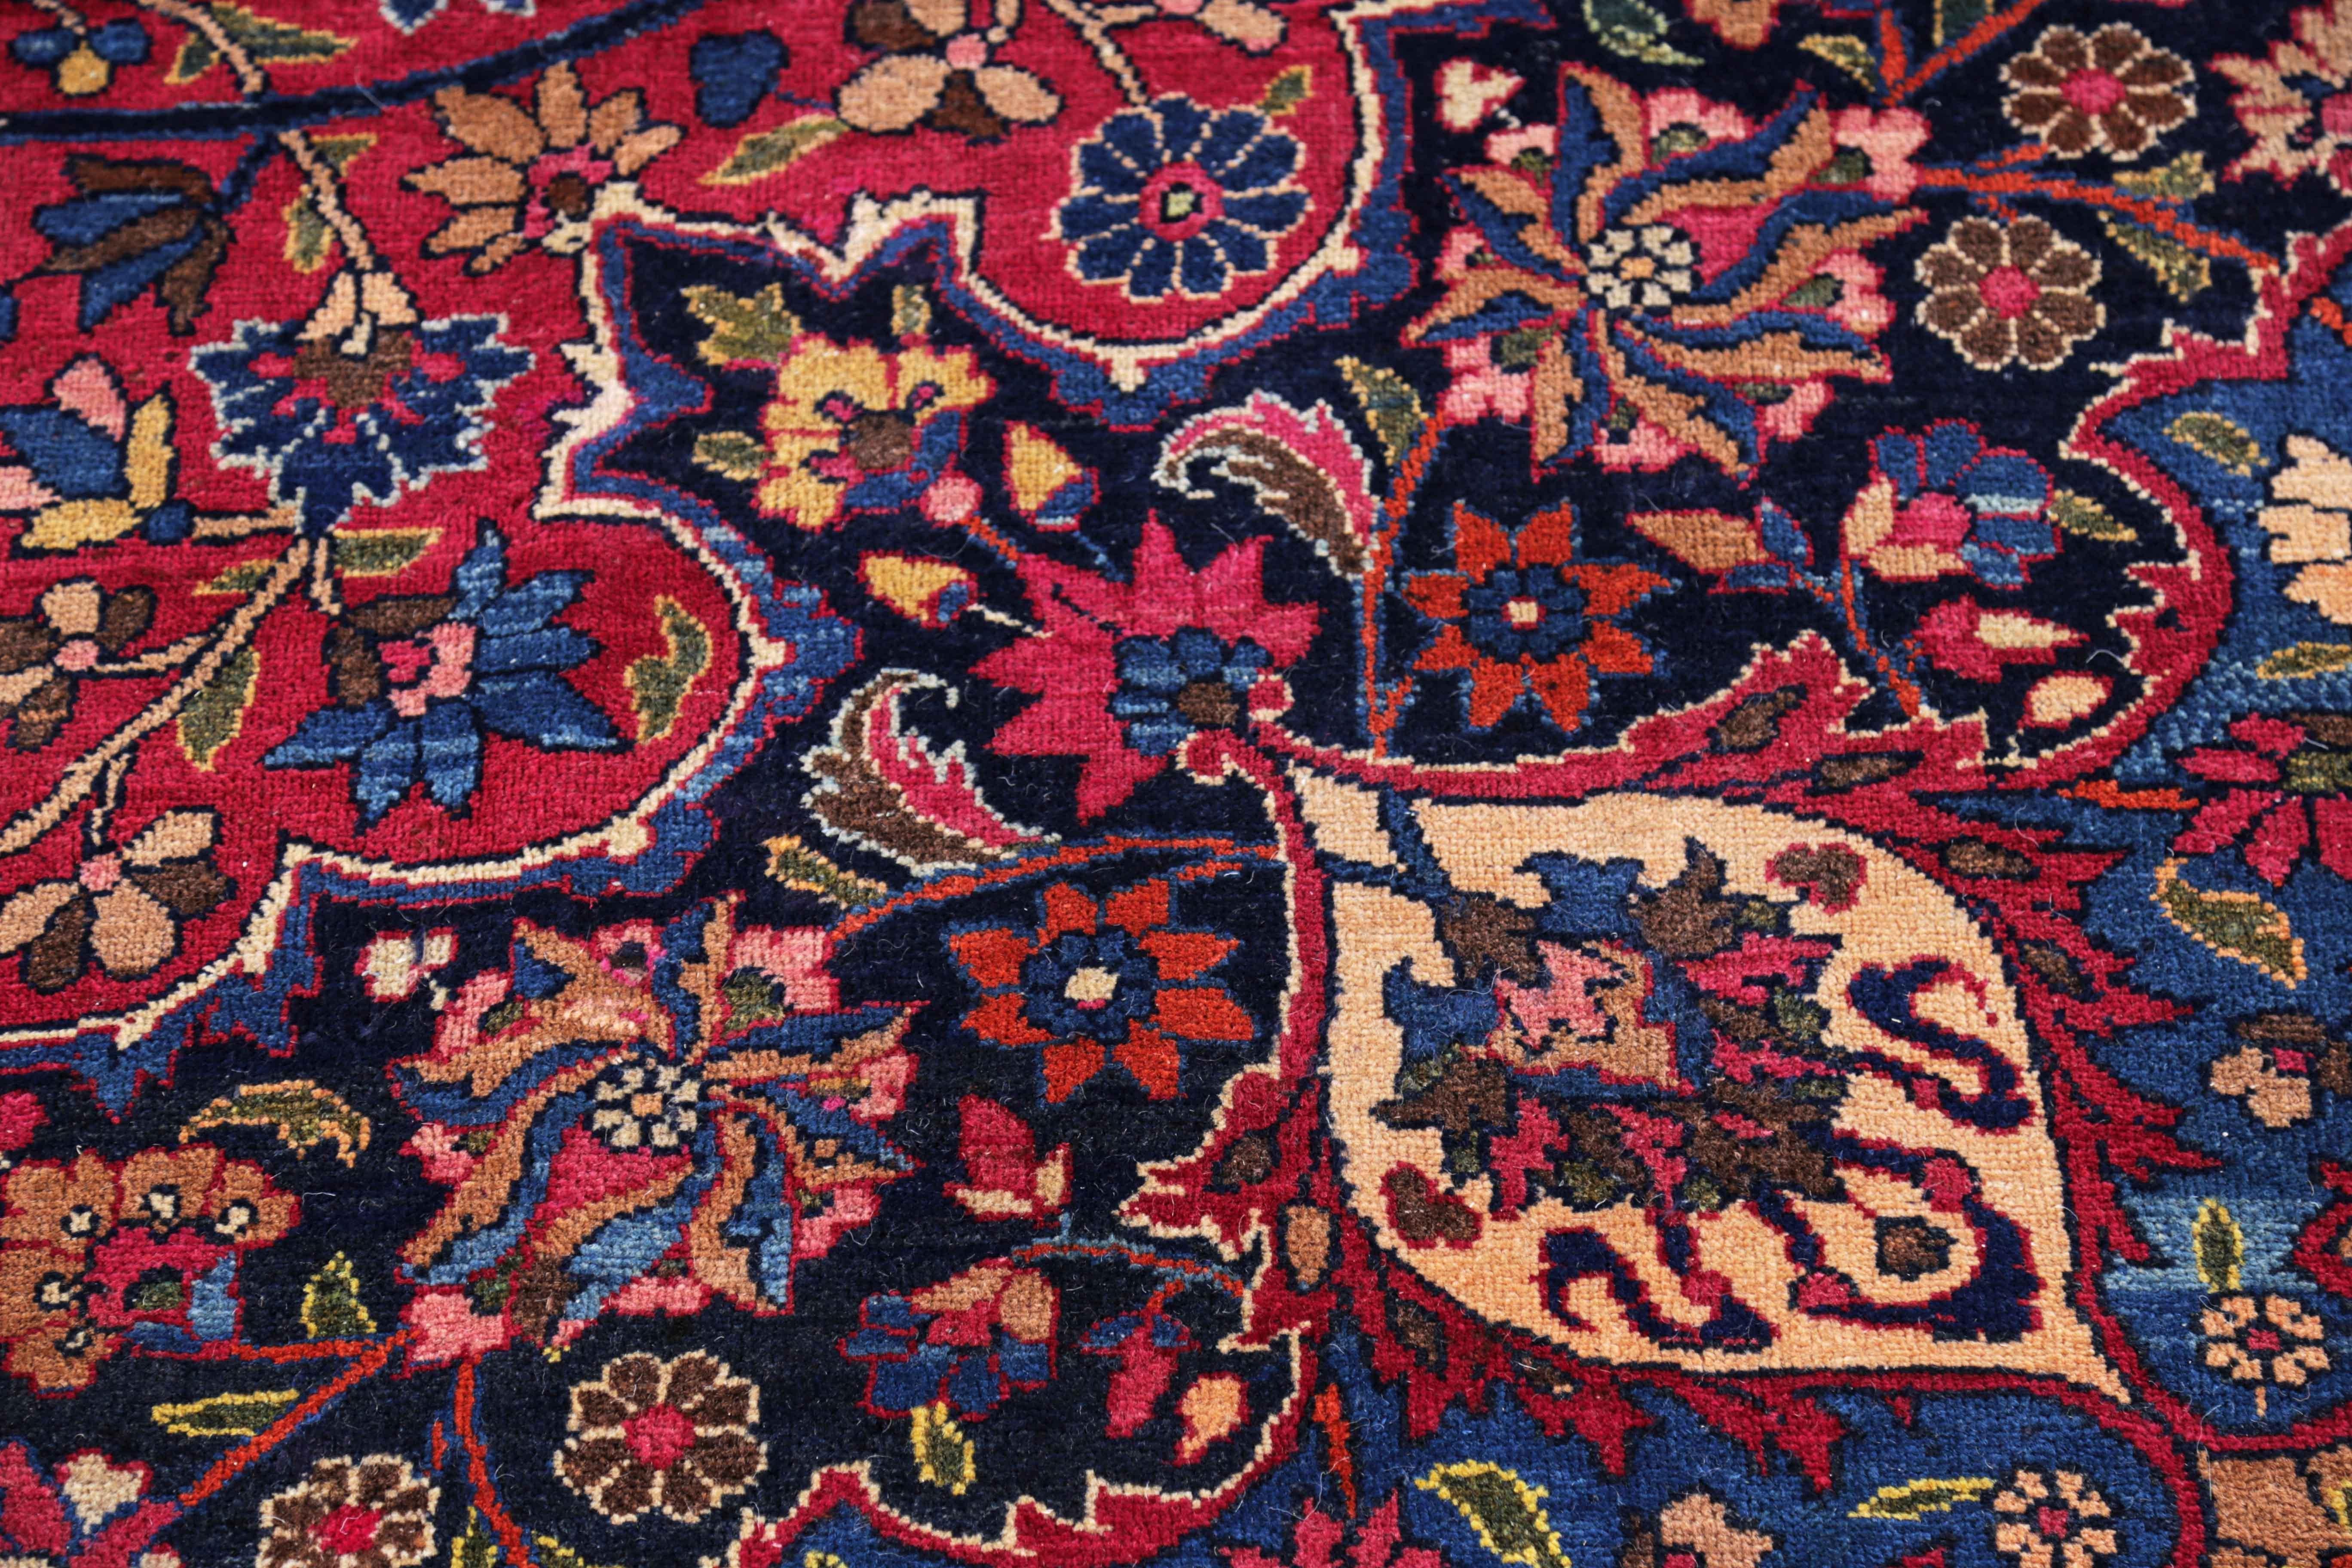 Hand-Woven Antique Persian Area Rug Mashad Design For Sale